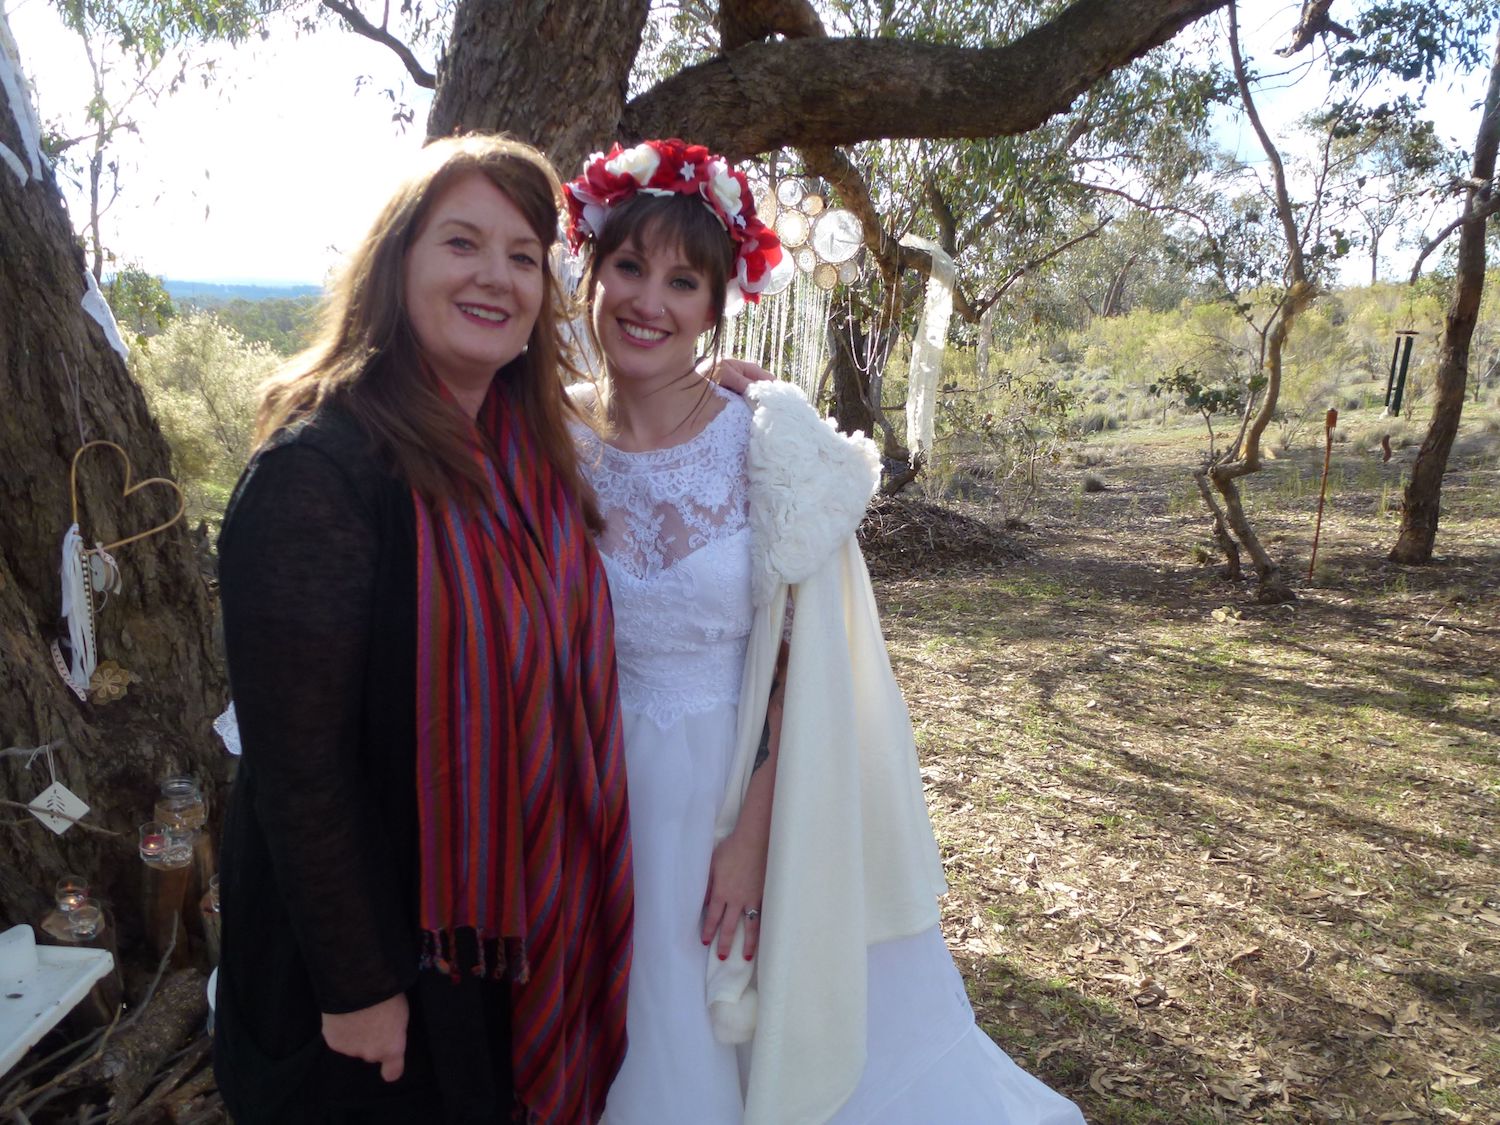 Genevieve Messenger Marriage Celebrant and funeral celebrant of Daylesford, Ballan, and Trentham with bride